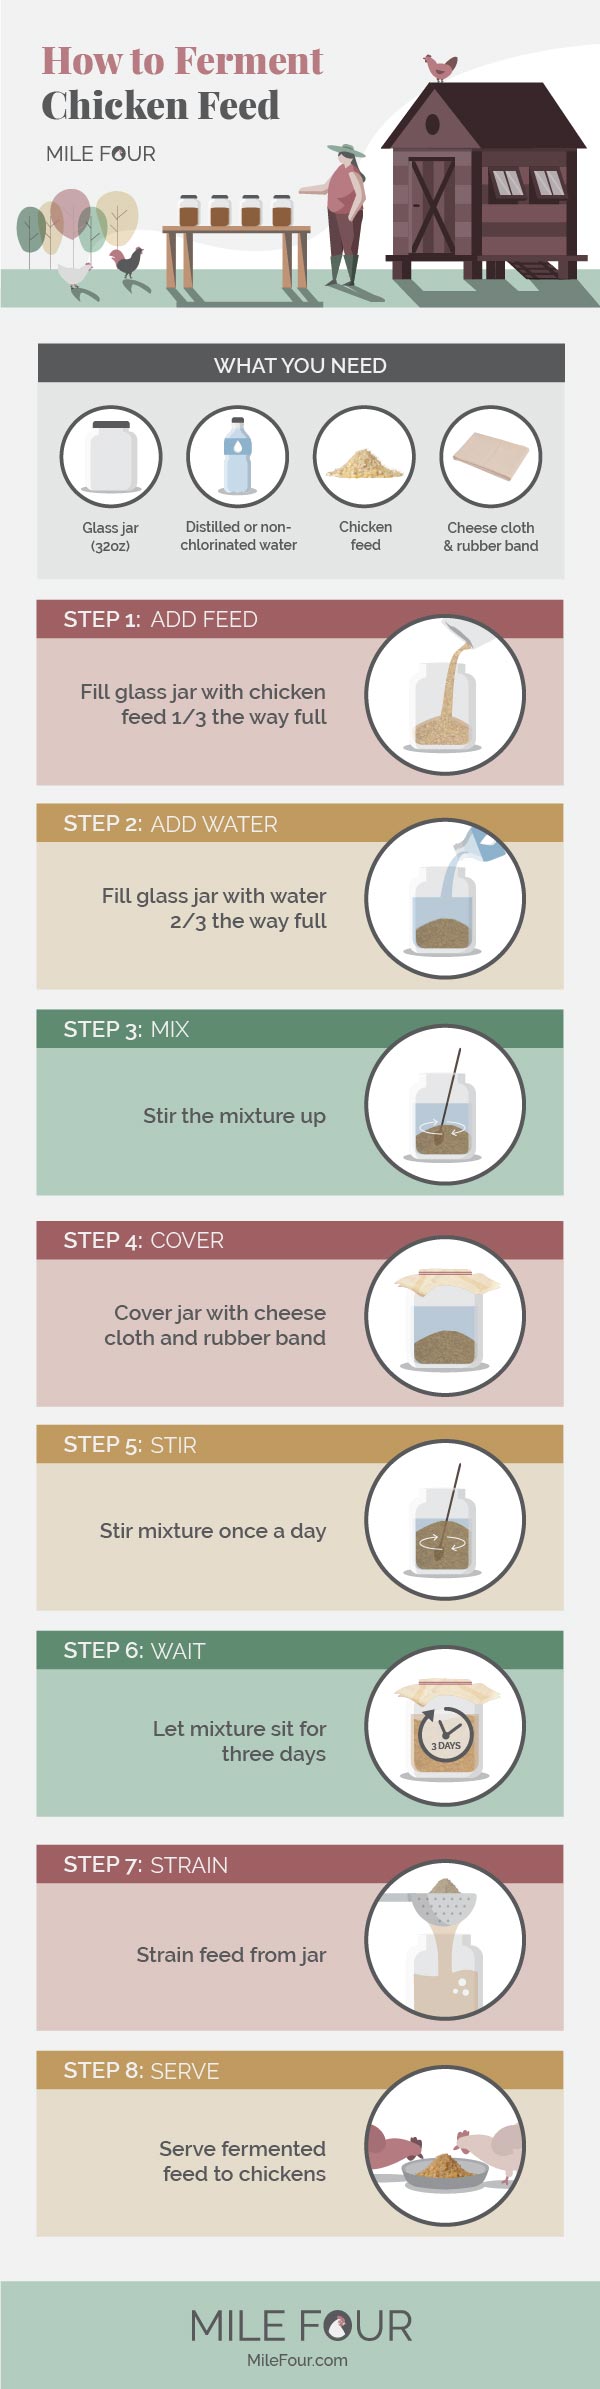 How to ferment chicken feed step by step instructions